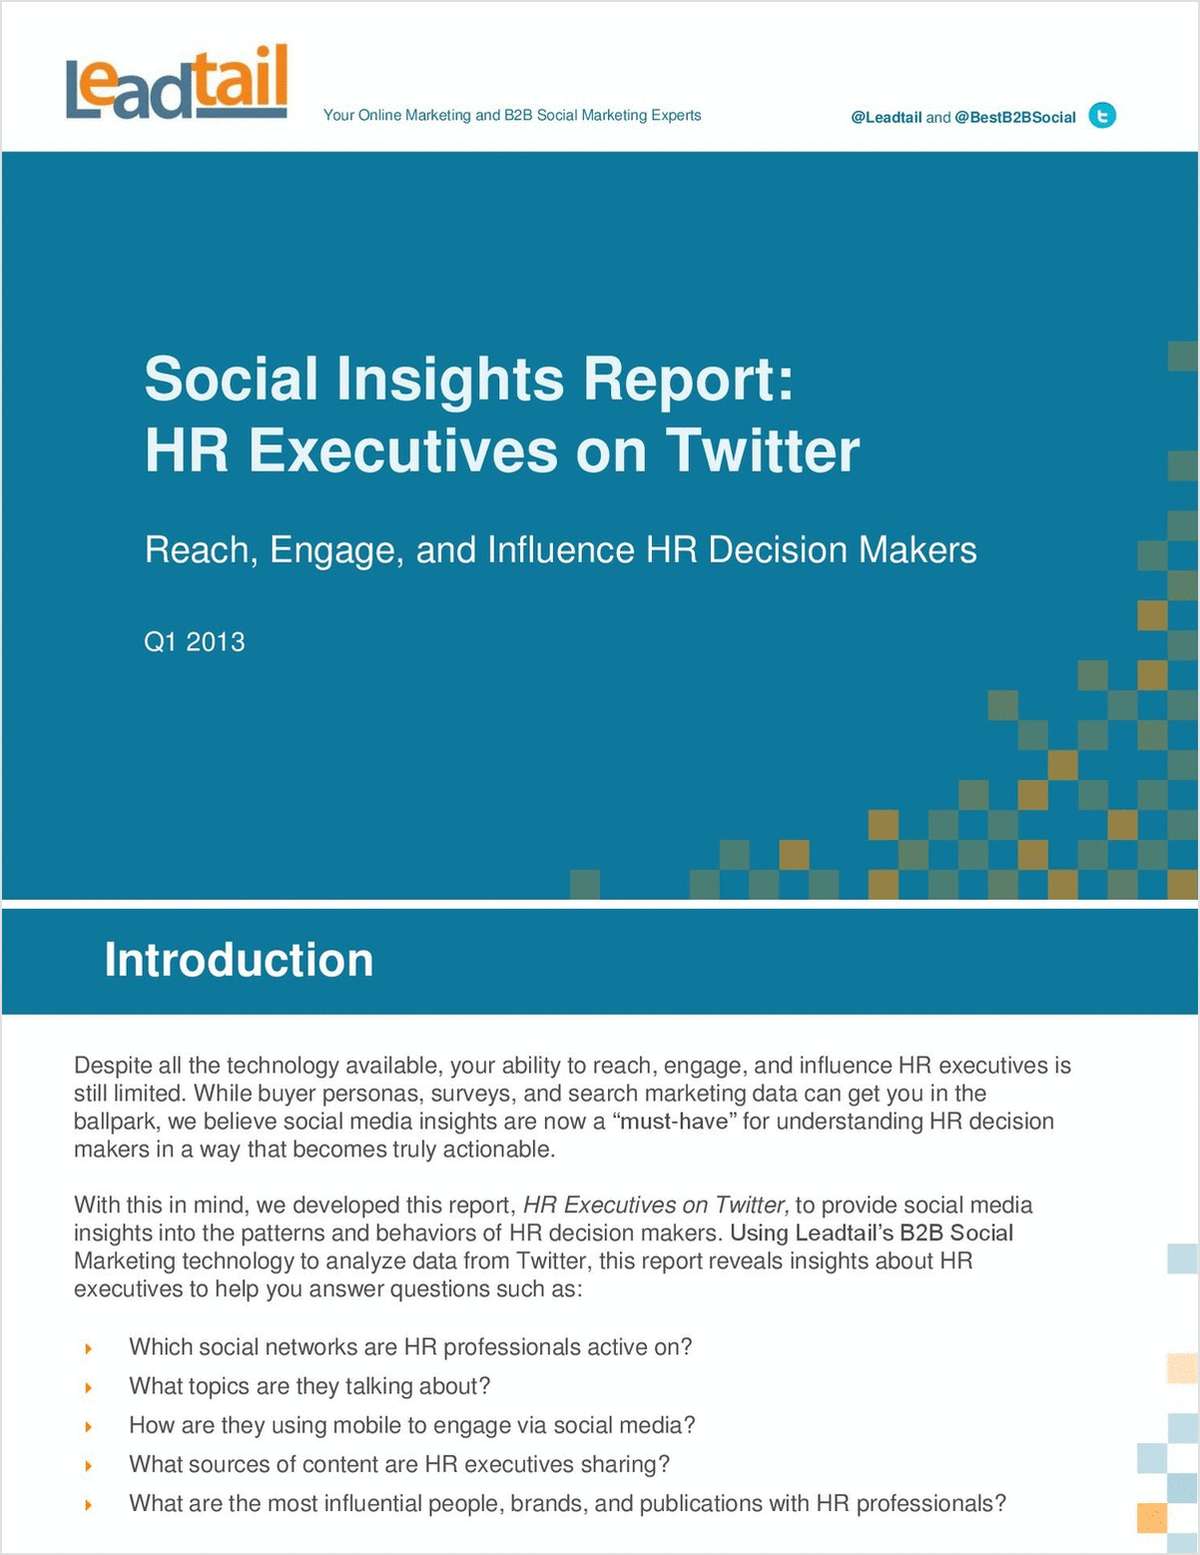 Social Insights Report: HR Executives on Twitter--Reach, Engage, and Influence HR Decision Makers